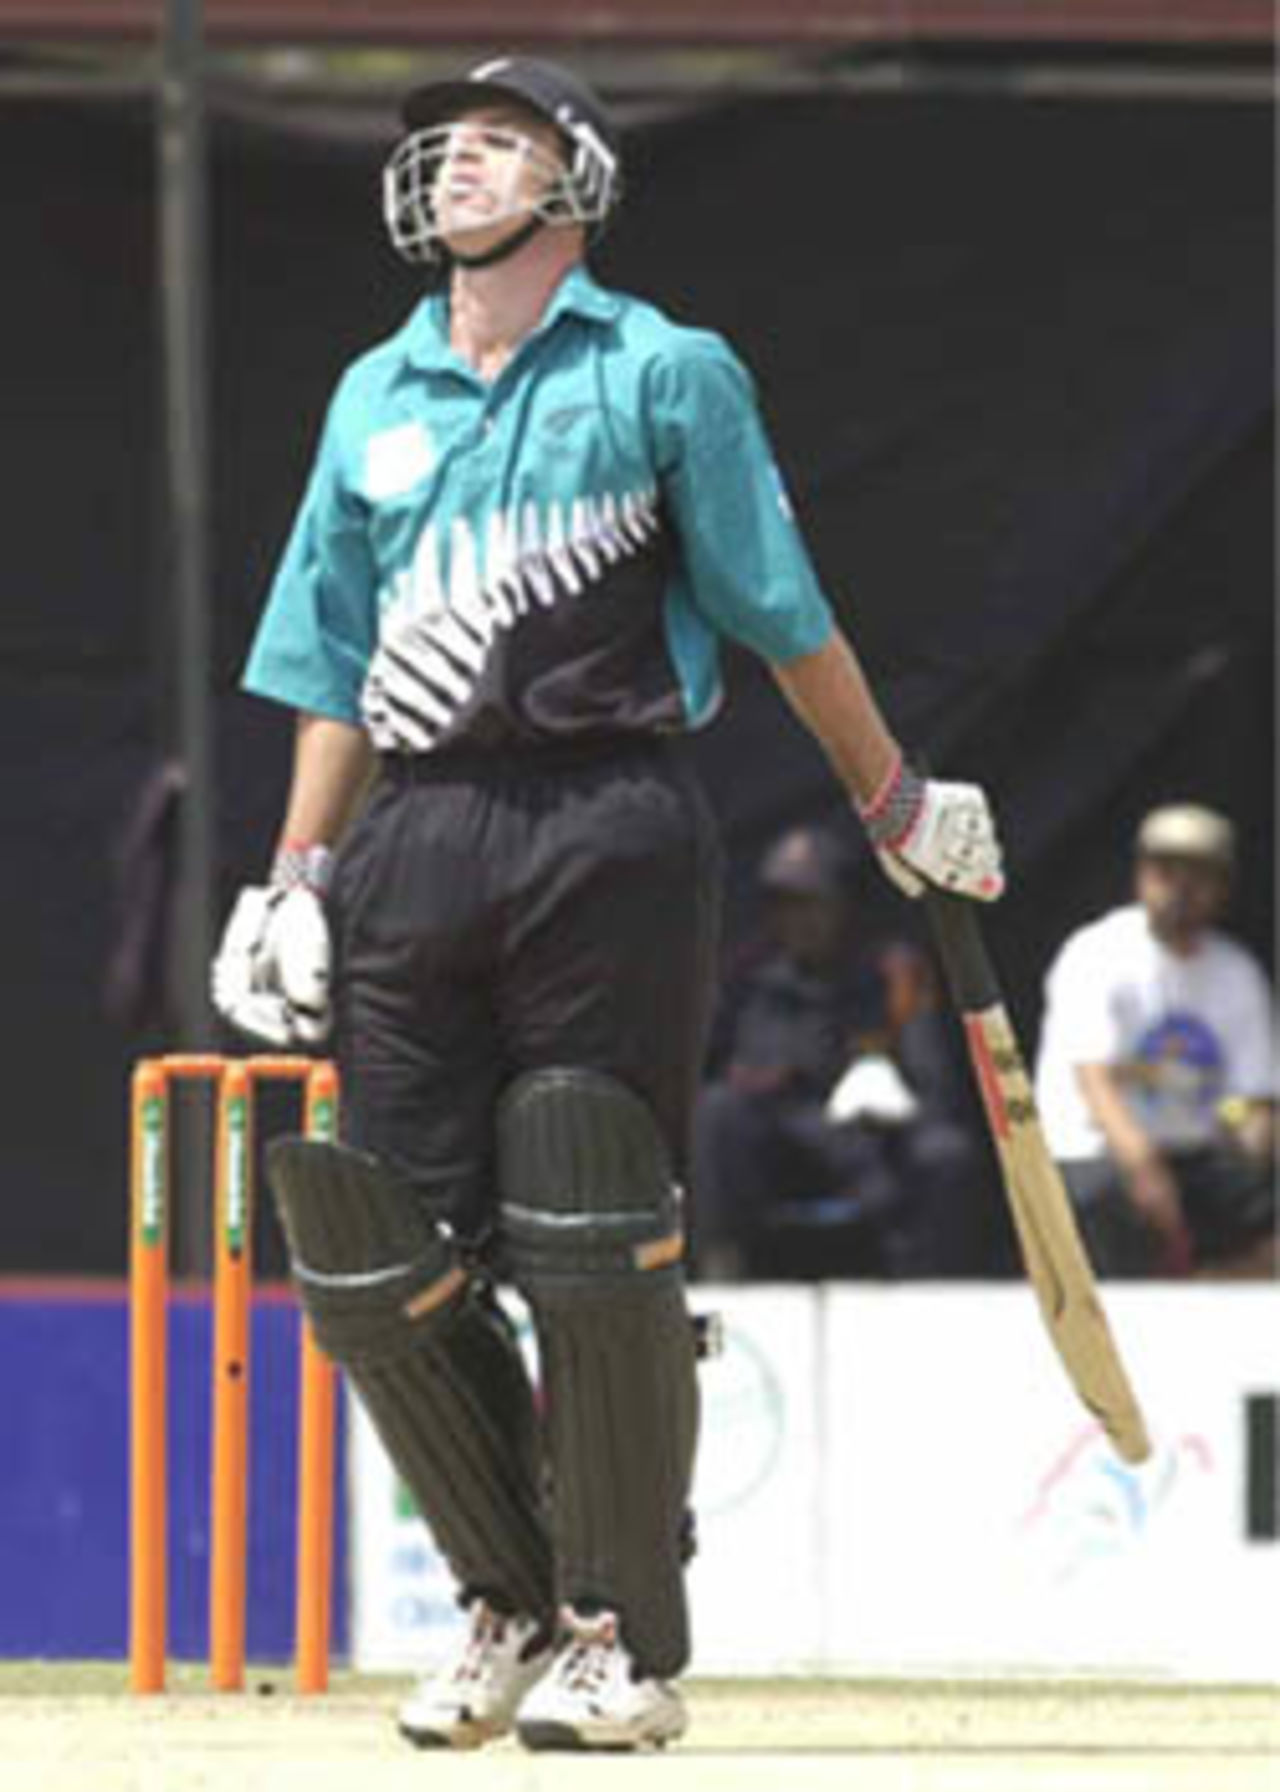 Spearman rues after Yuvraj brings off a scintillating catch, ICC KnockOut, 2000/01, Final, India v New Zealand, Gymkhana Club Ground, Nairobi, 15 October 2000.